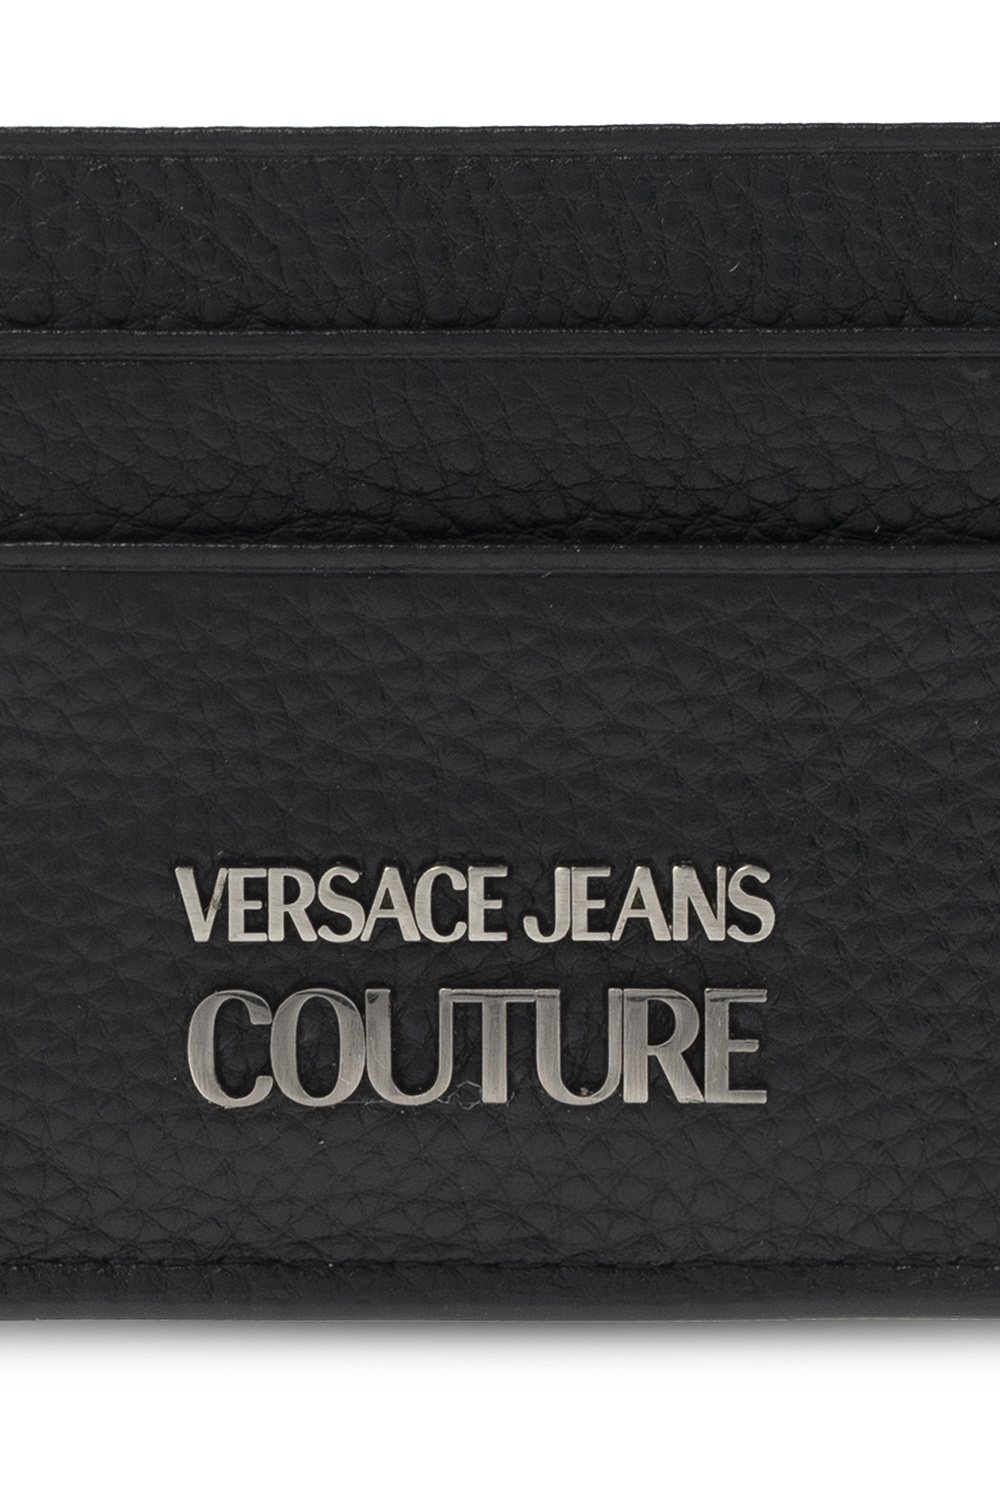 Versace Jeans Couture Nike Luxe Tight Leggings Femme